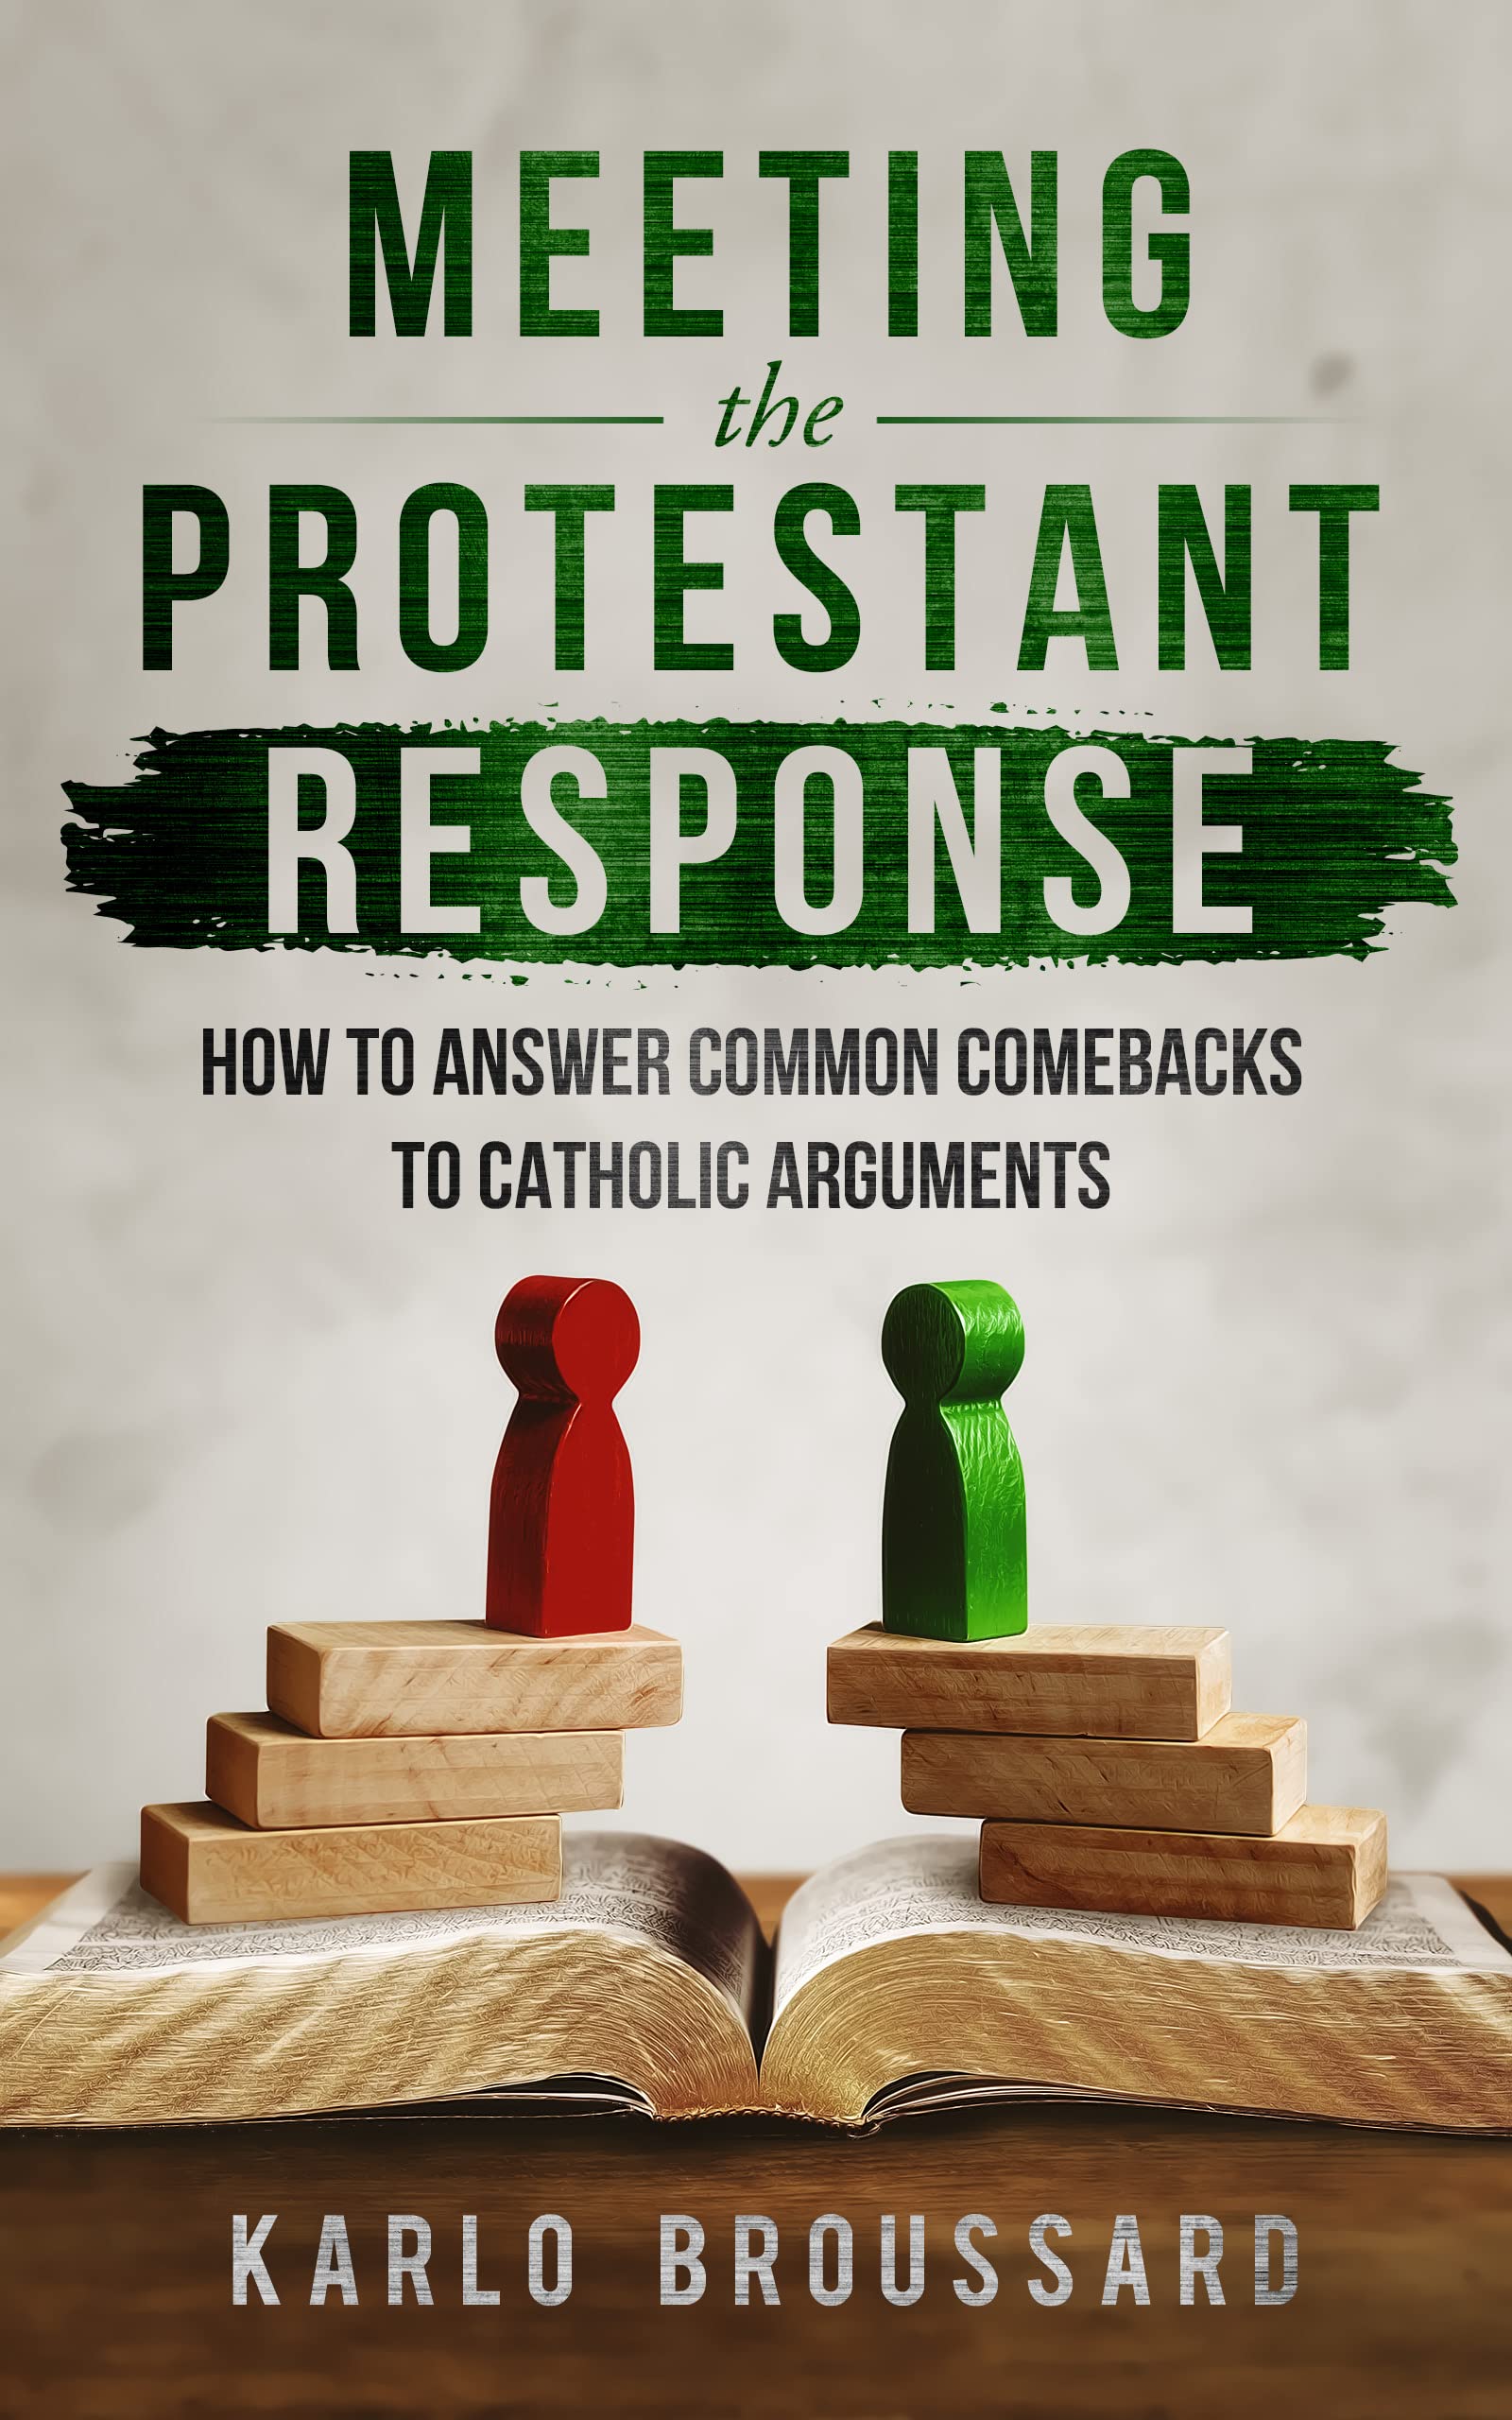 Meeting the Protestant Response - How to Answer Common Comebacks to Catholic Arguments